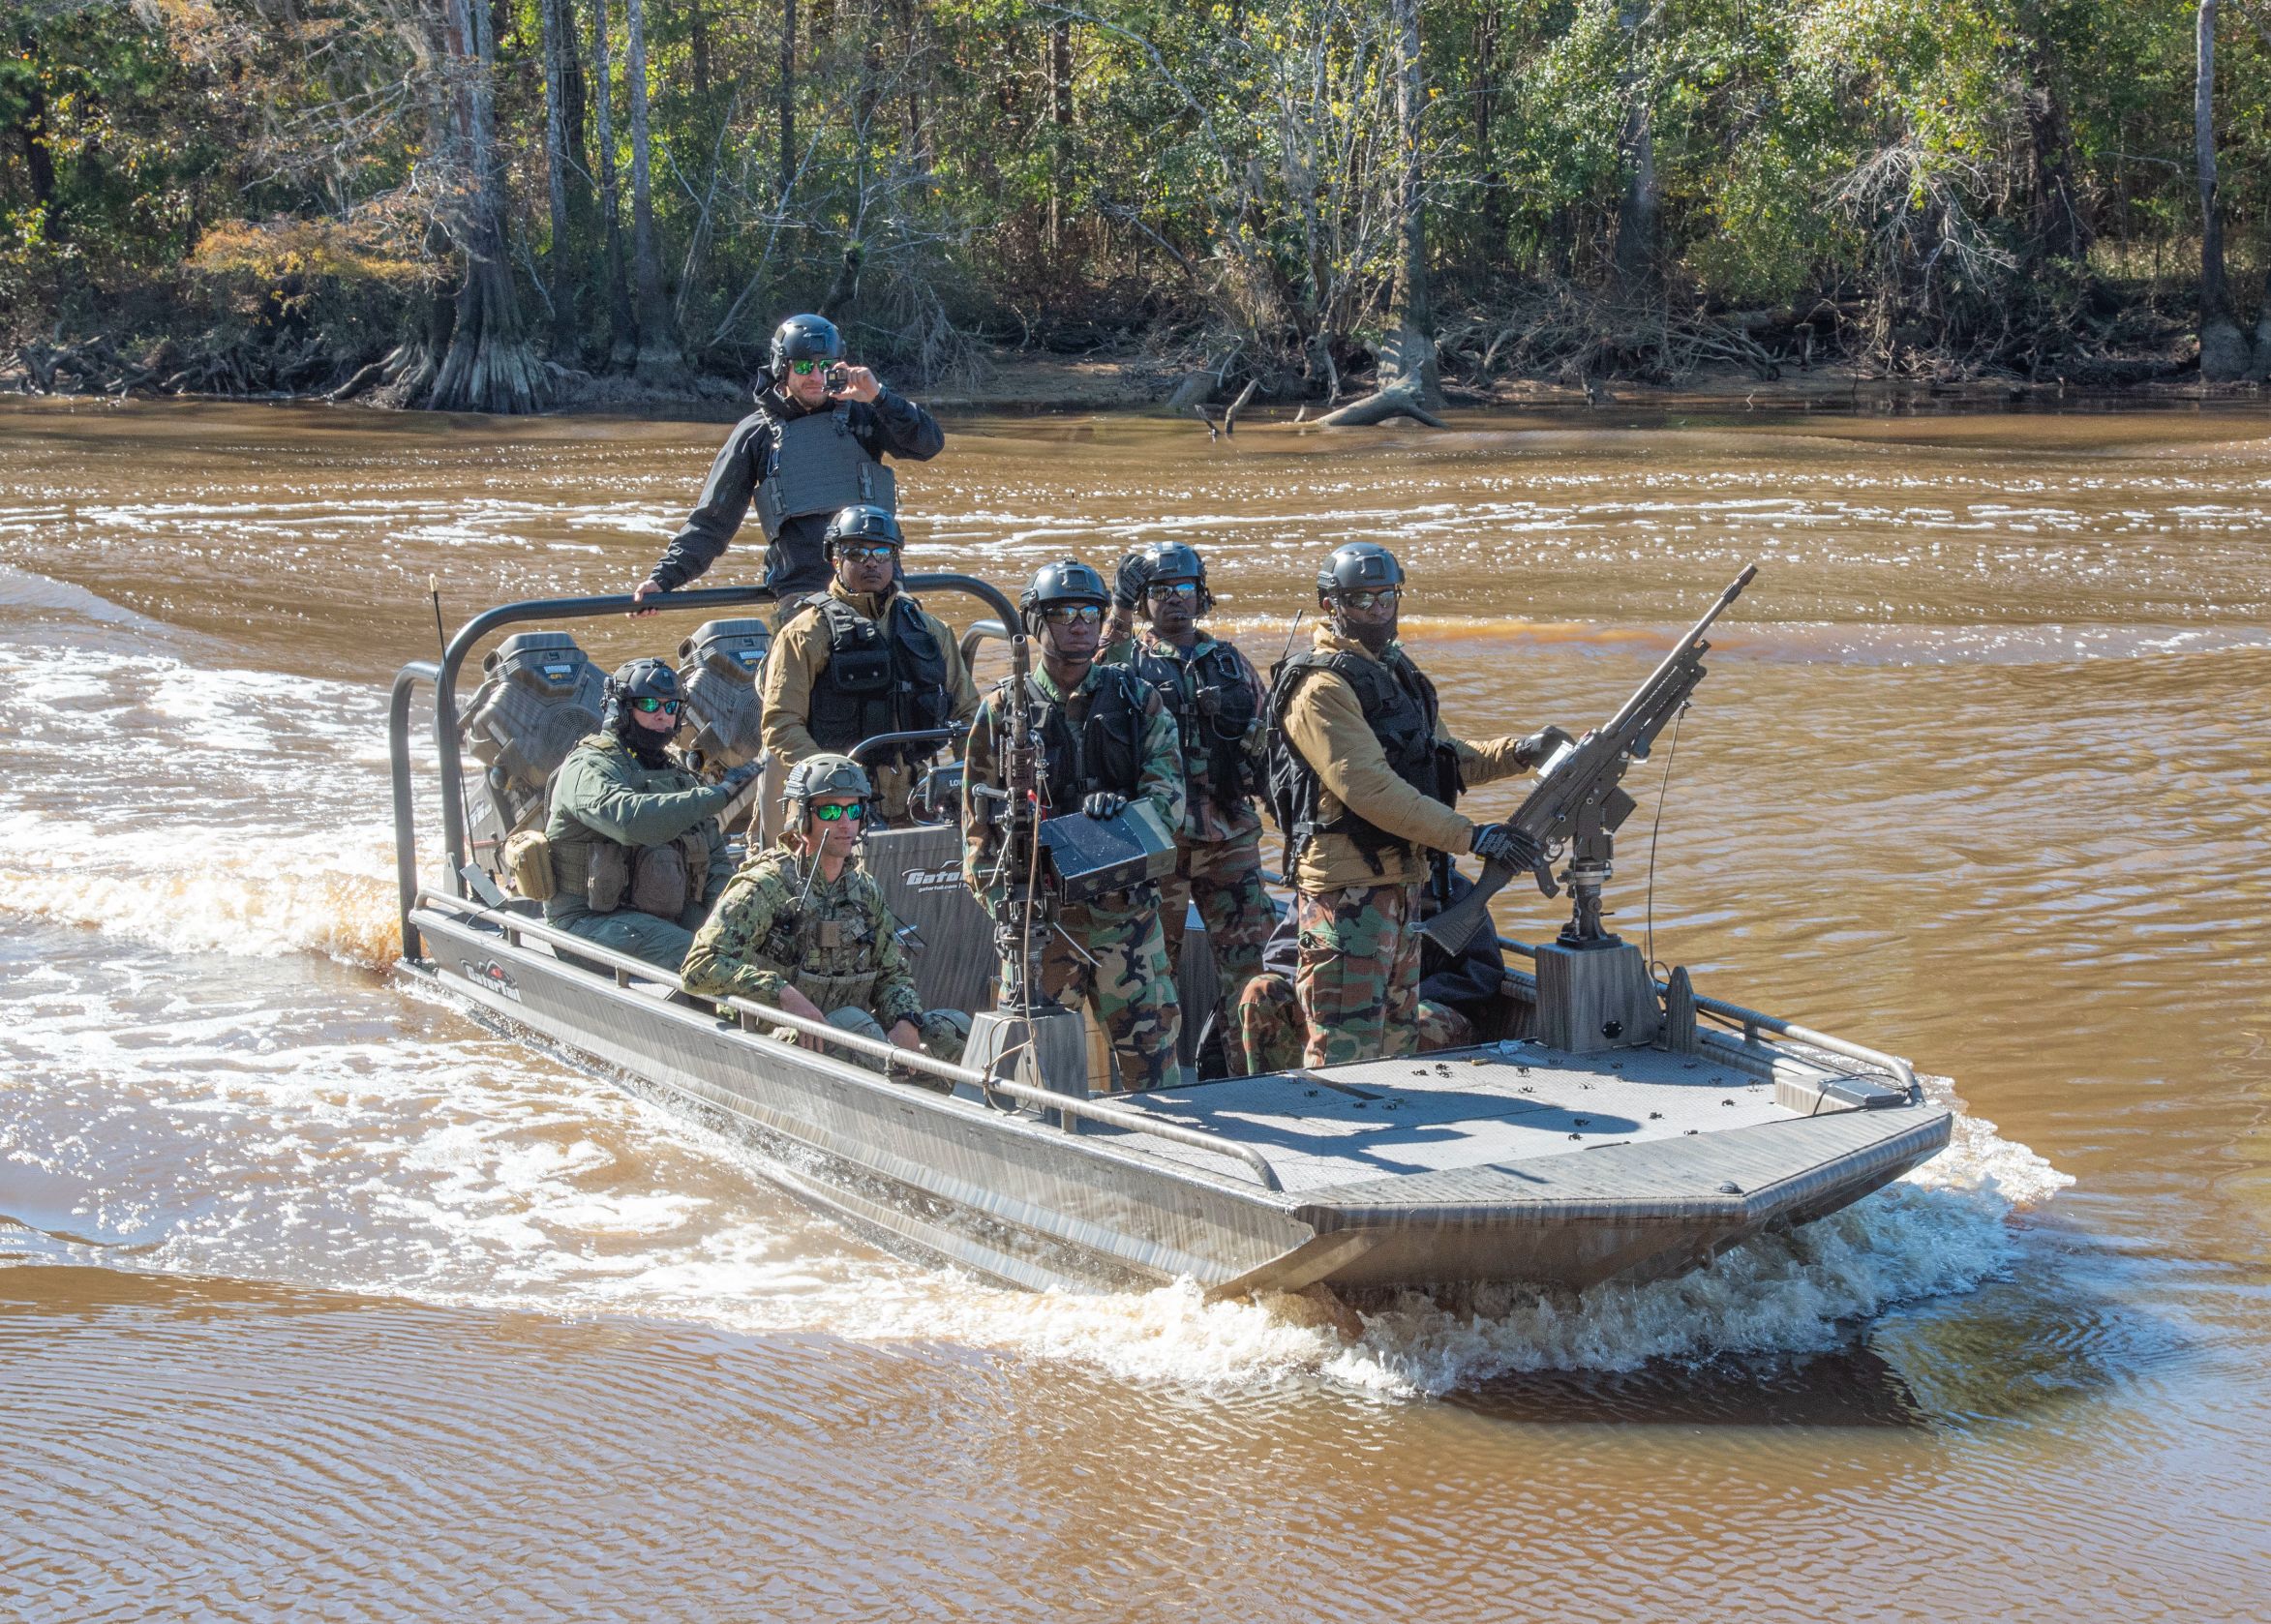 Naval Small Craft Instruction and Technical Training School (NAVSCIATTS) students from Africa Command (AFRICOM) participate in a Patrol Craft Officer Riverine training exercise on the Pearl River, near the John C. Stennis Space Center, Mississippi, Dec. 2, 2020.